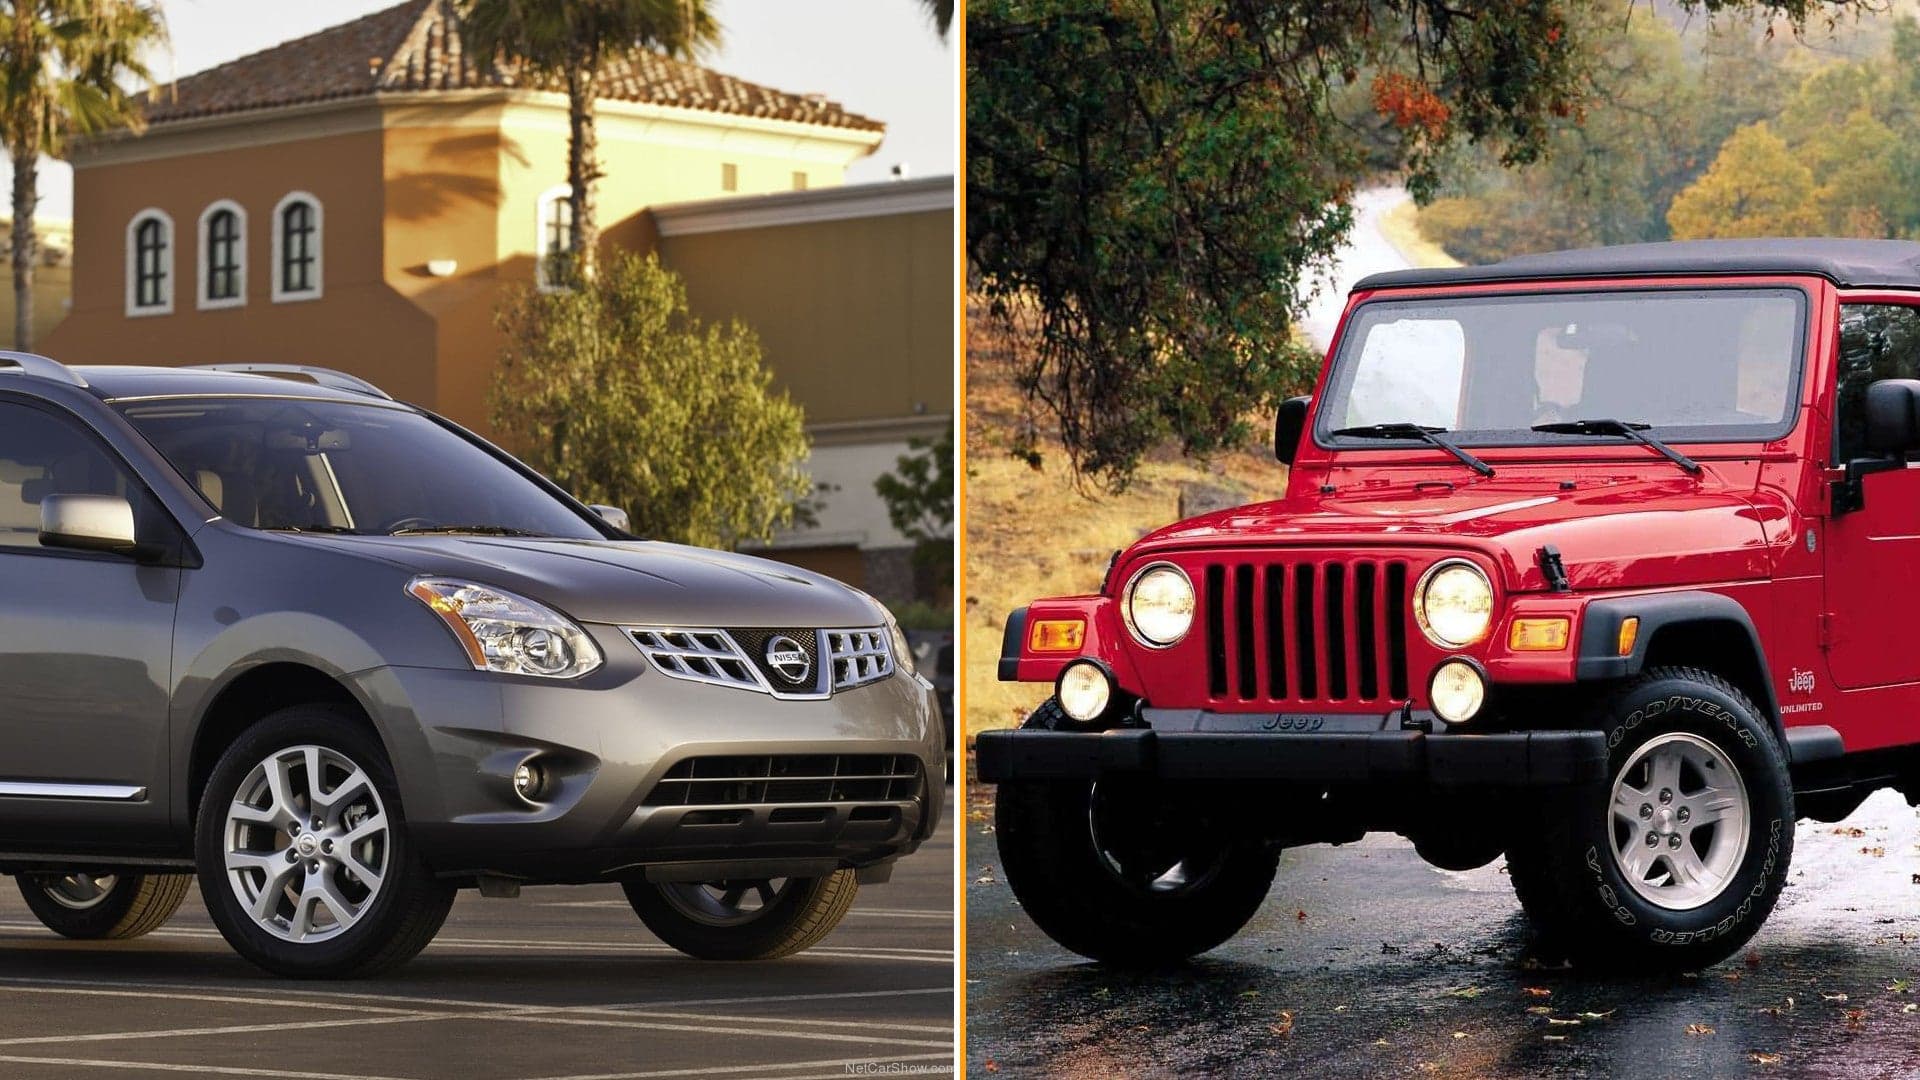 Car Thief Steals Woman’s Jeep Wrangler, Leaves Nissan Rogue in Her Parking Spot